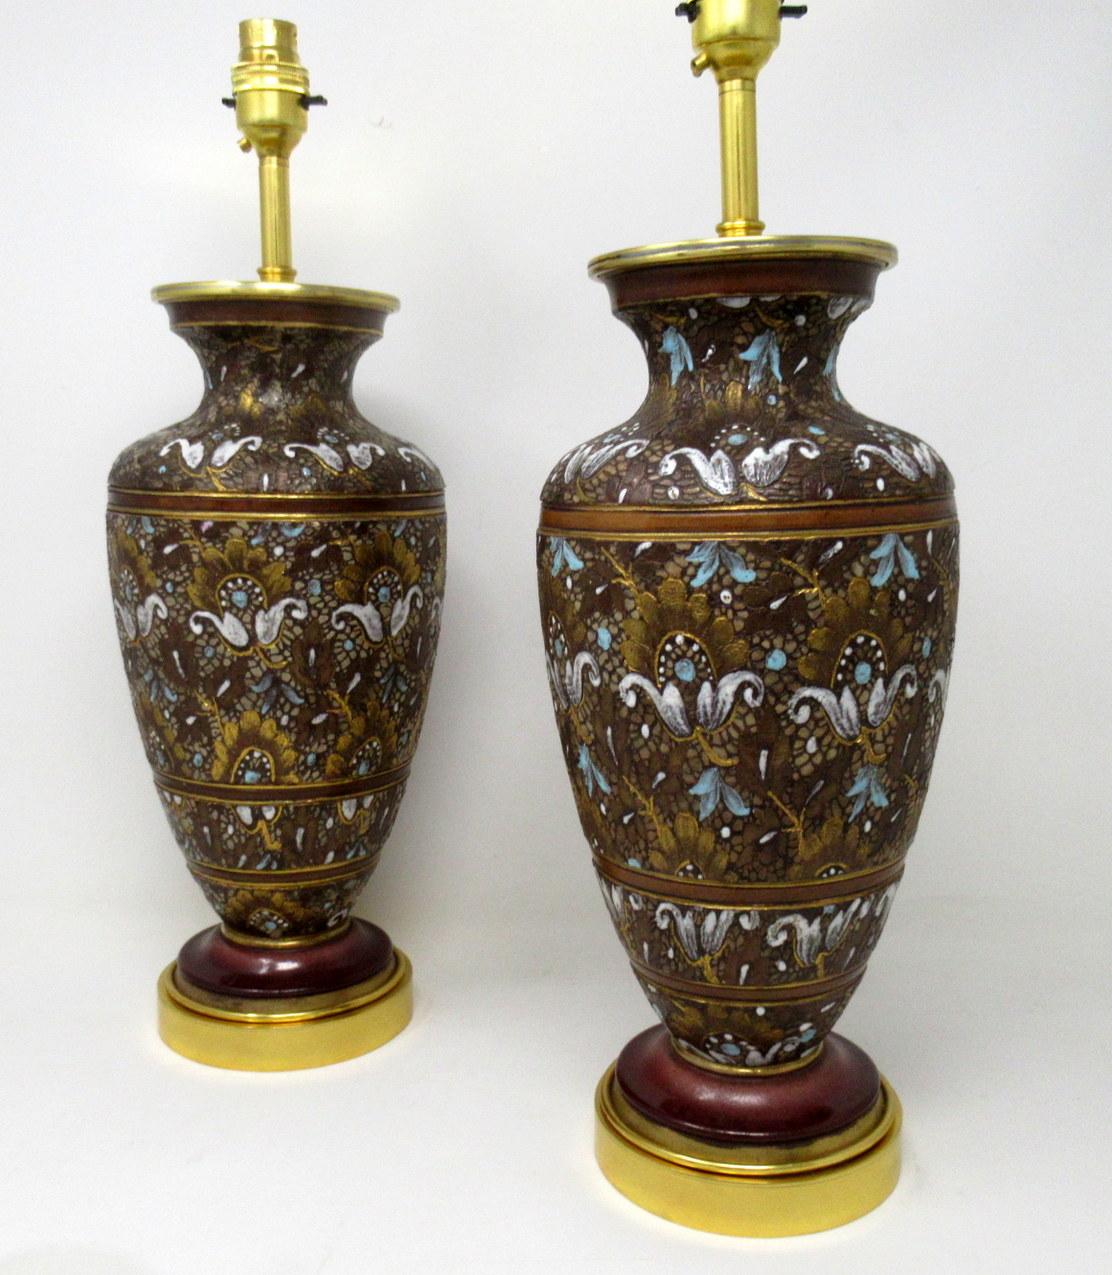 A fine pair of stylish and imposing ormolu mounted English pottery vases now converted to electric table lamps of generous proportions, mid to late 19th century. 

These exceptional vases with their lavish stylized floral decoration using autumn